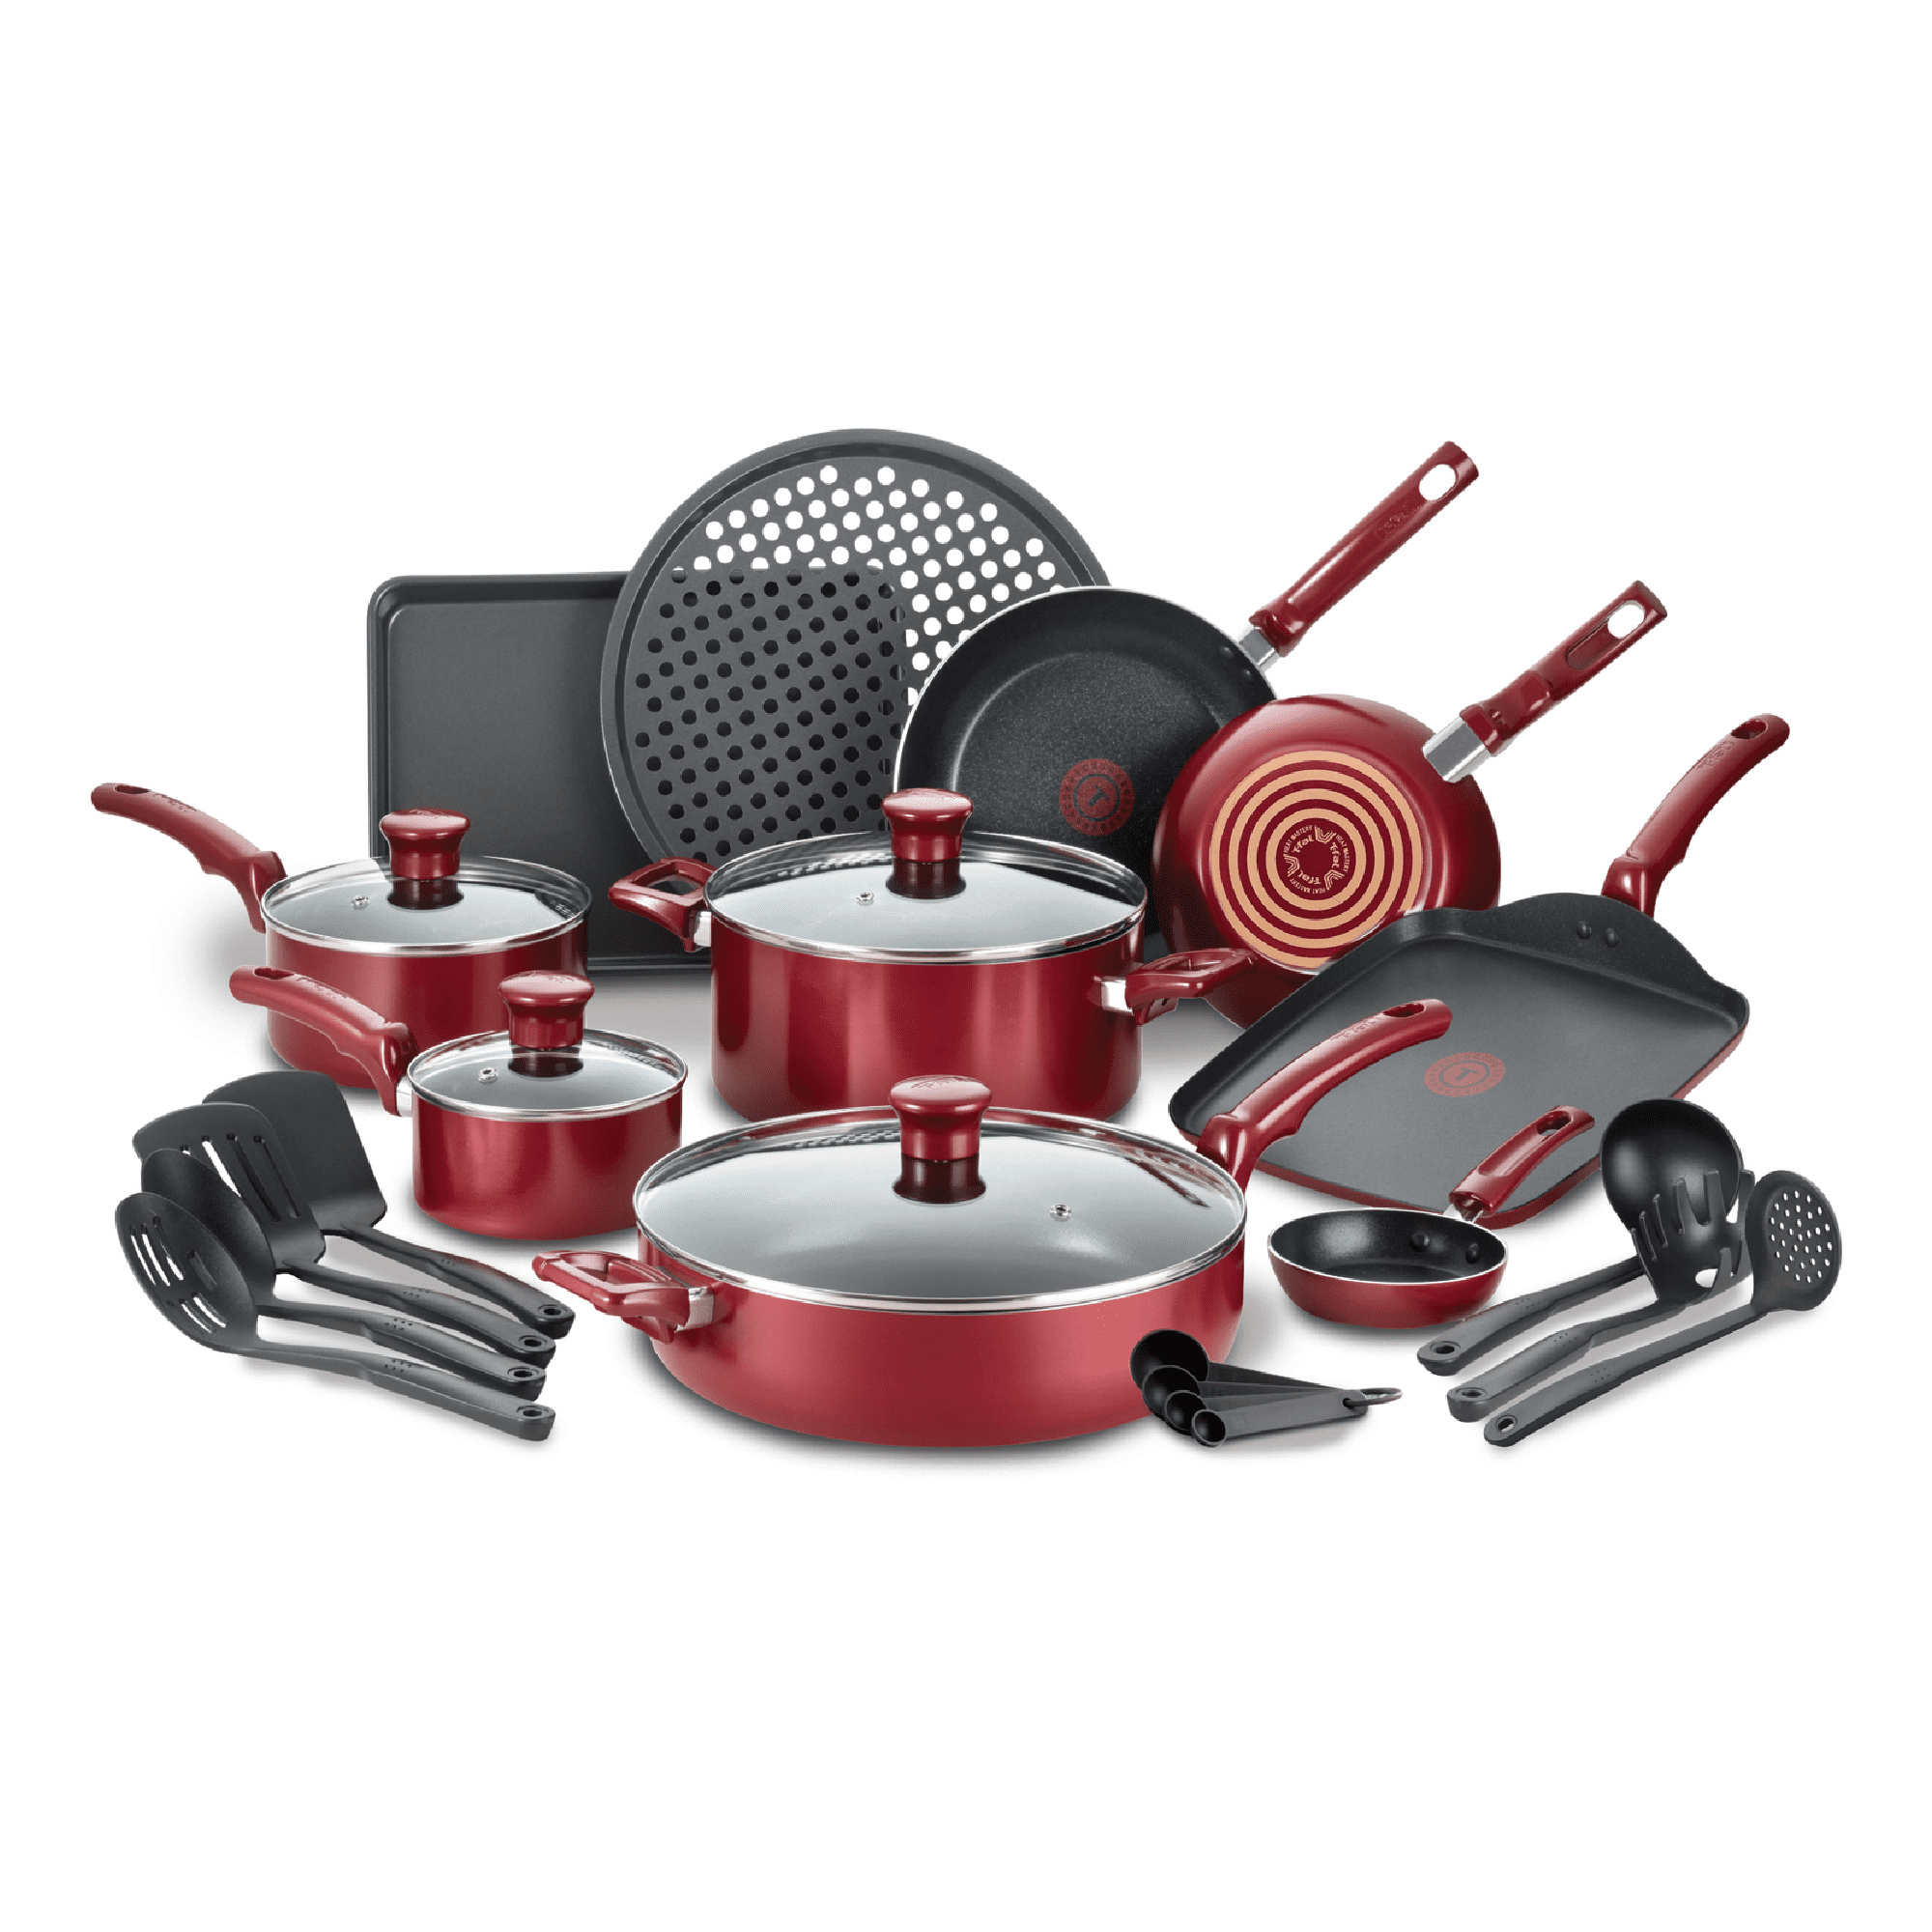 OSQI Nonstick Cookware Set with Glass Lids - Aluminum Bakeware, Pots and  Pans, Storage Bowls & Utensils, Compatible with All Stovetops, 21 Piece,  Red